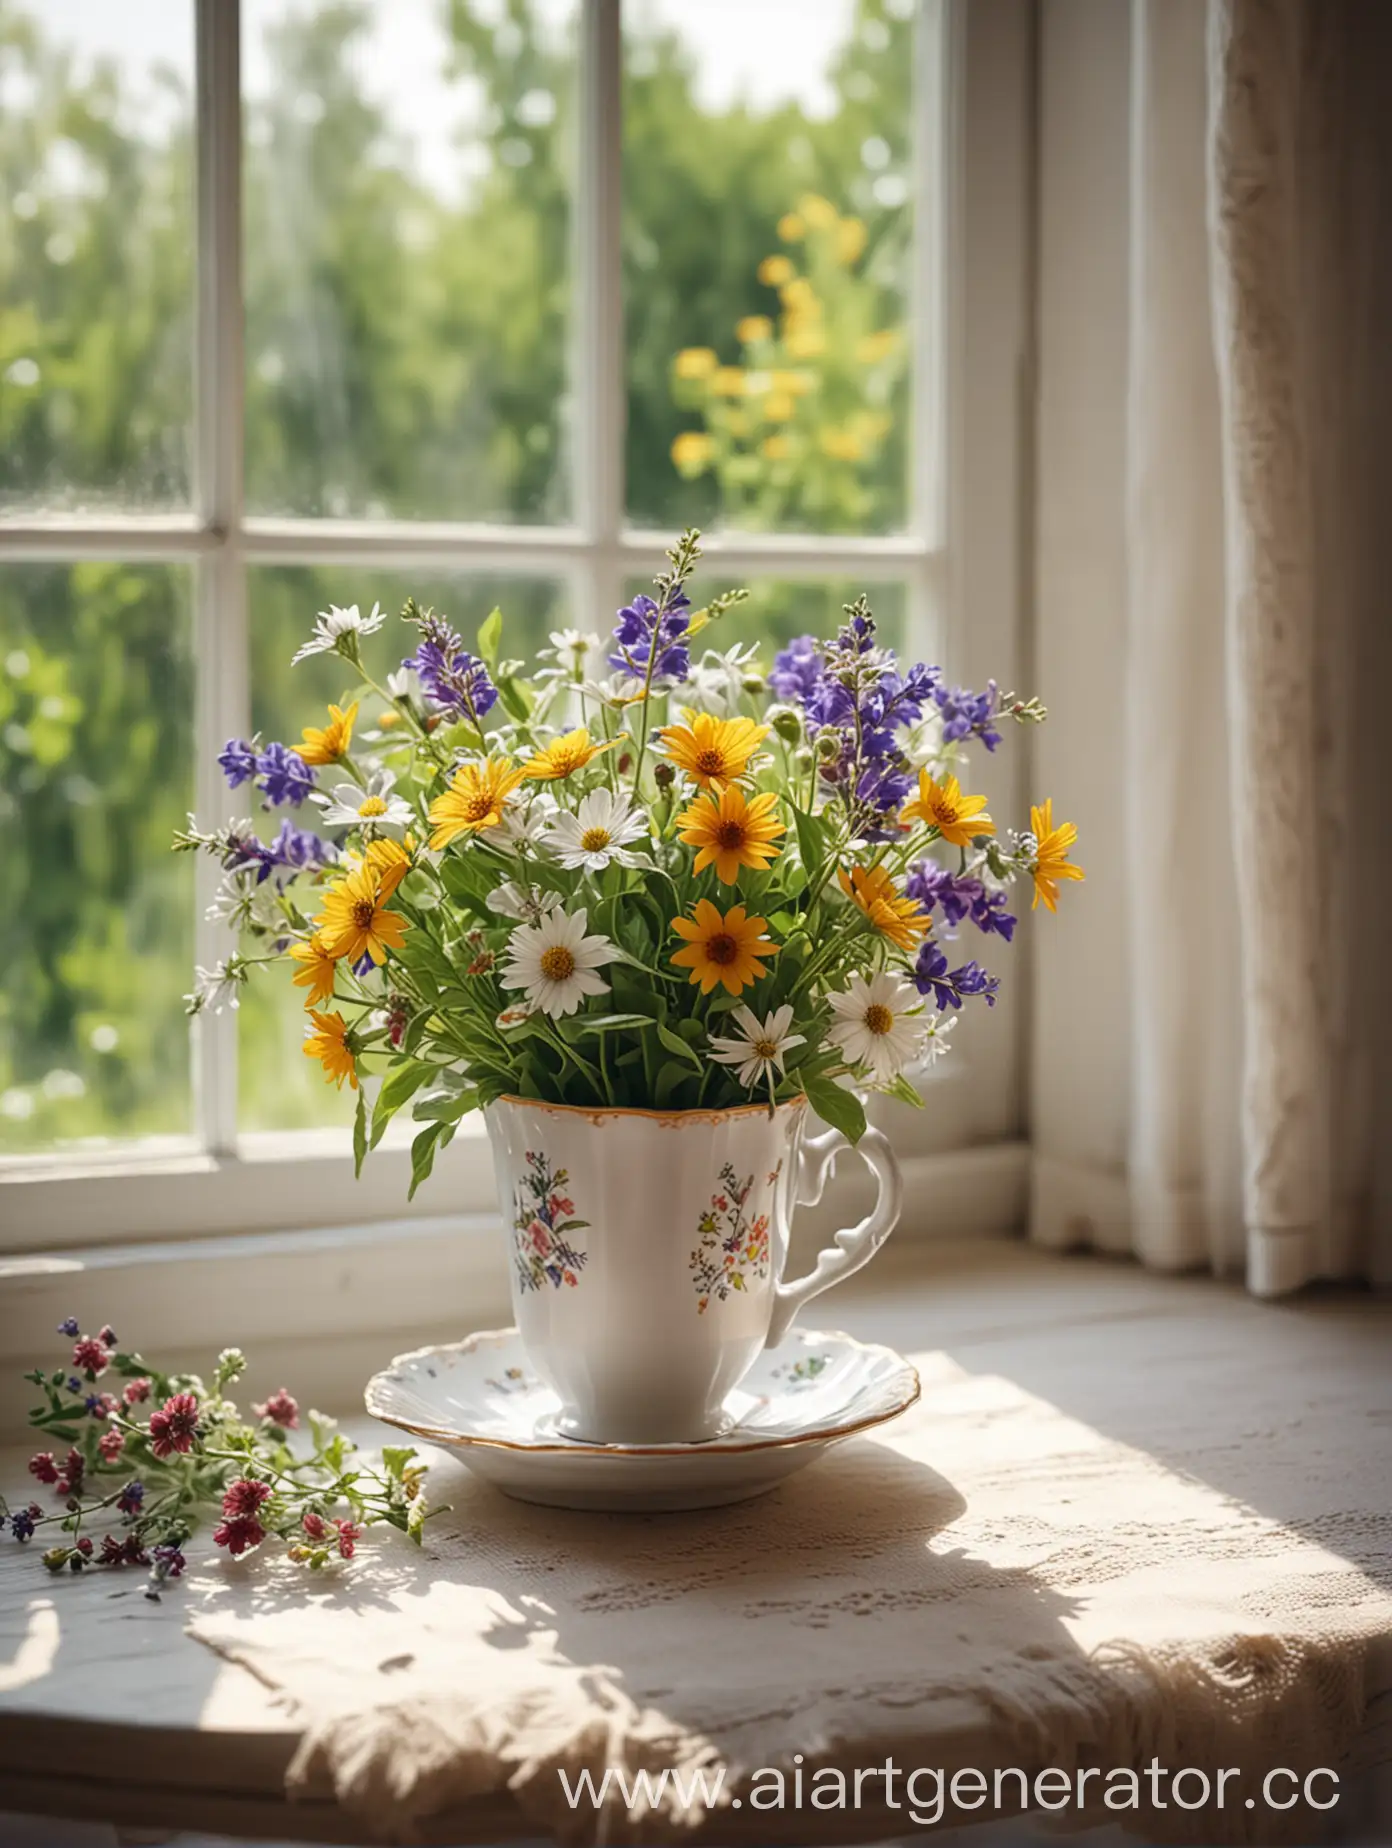 Cozy-Home-Scene-Teacup-and-Wildflowers-by-Sunny-Window